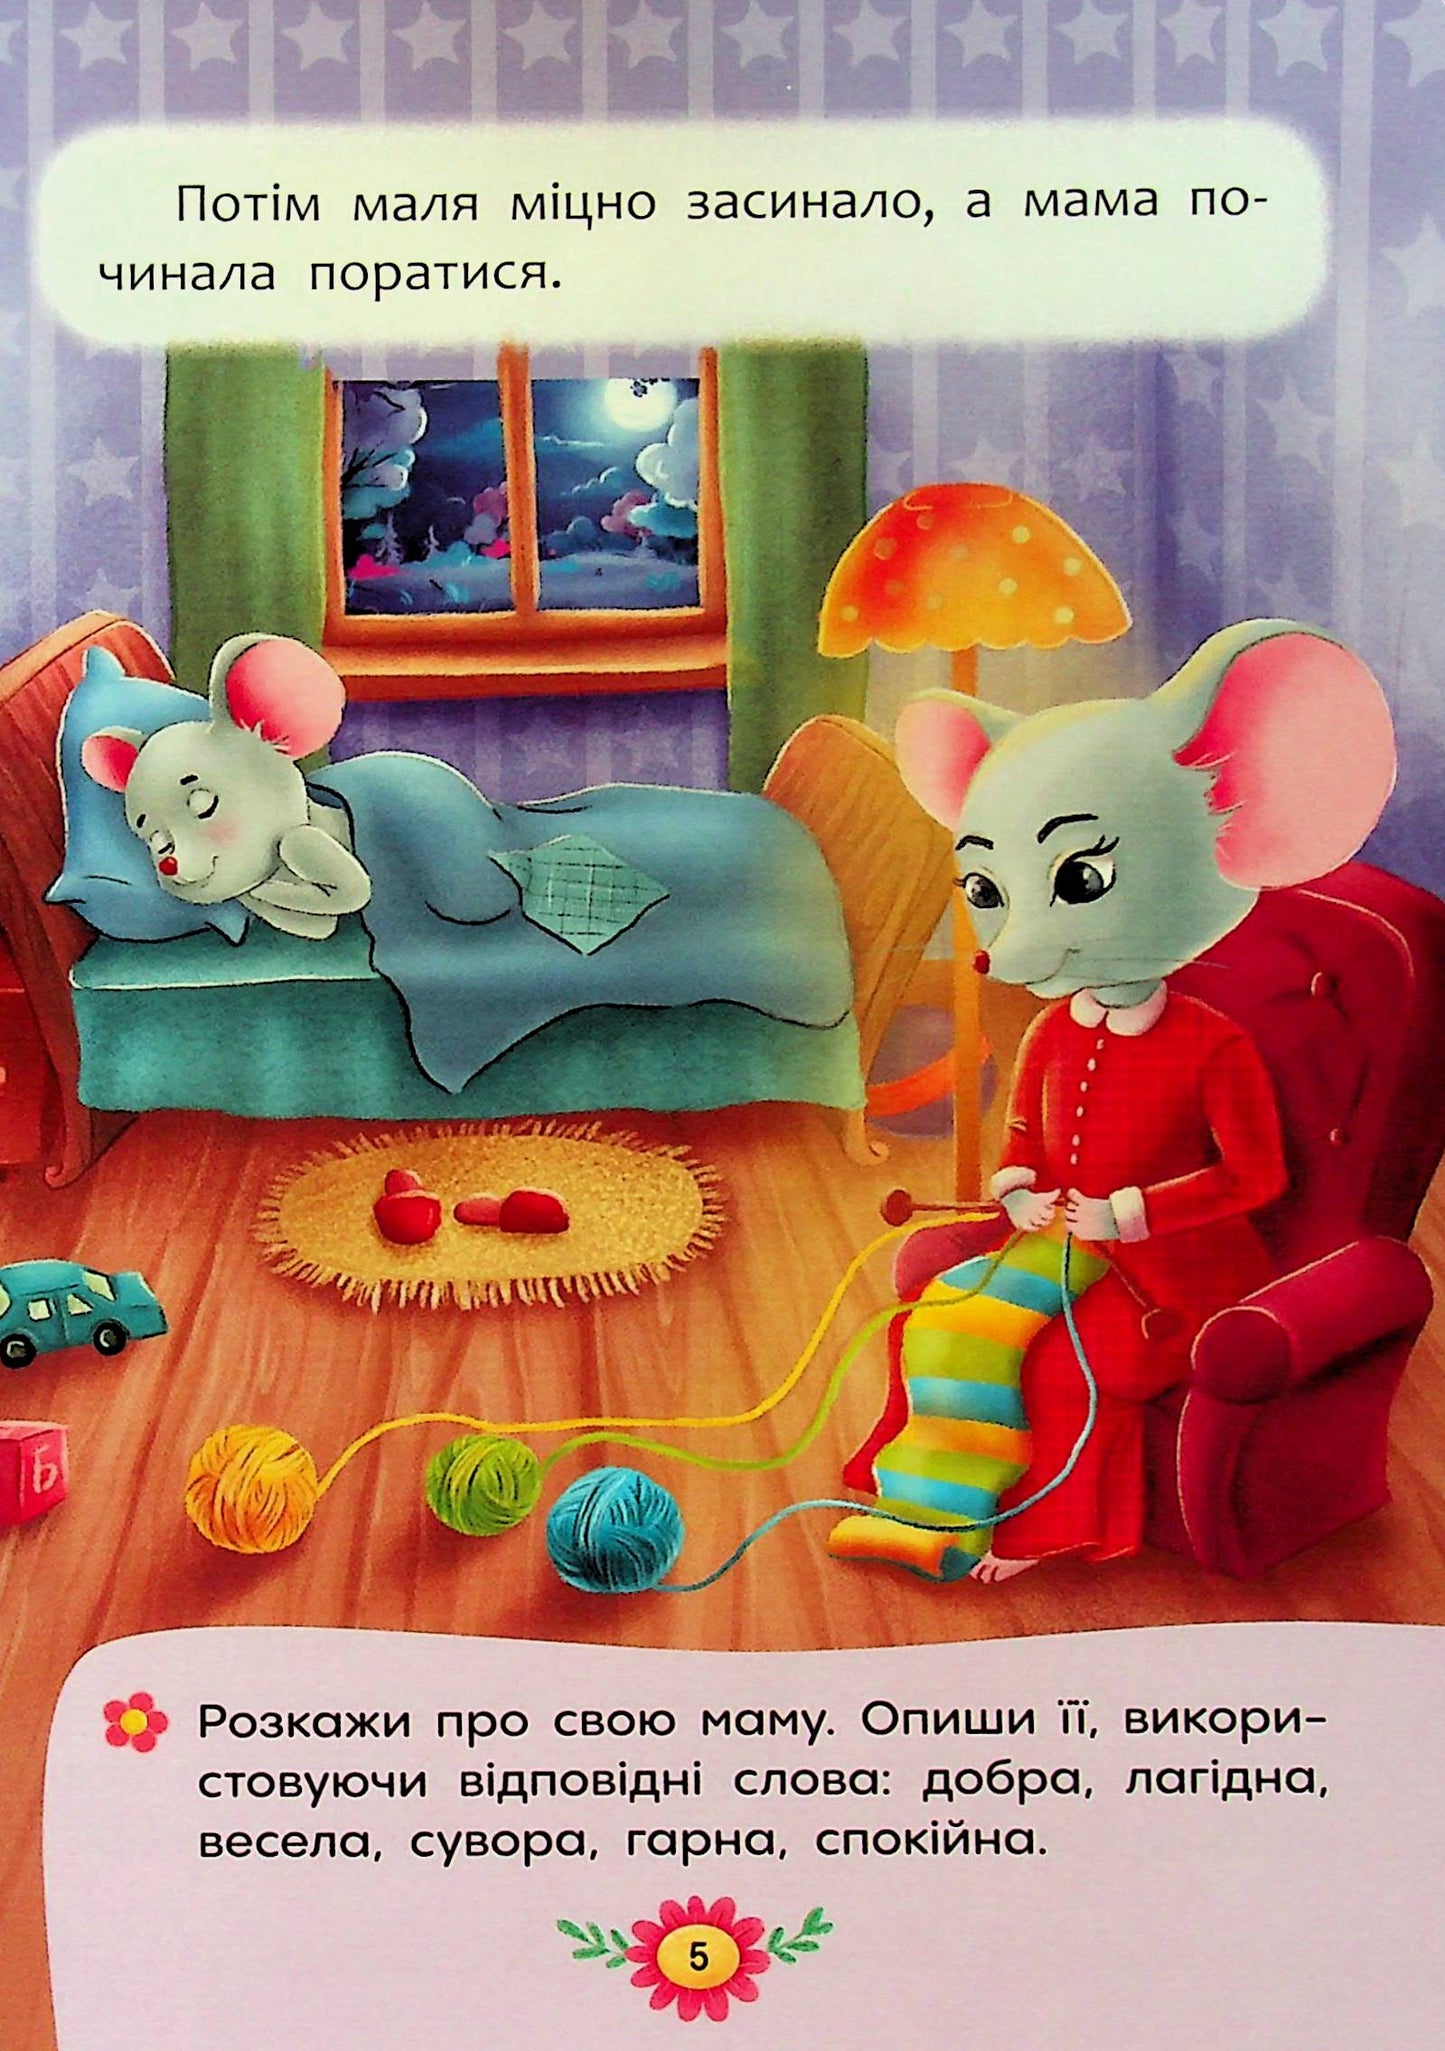 Educational fairy tales. Everything that is important for children to know / Виховальні казки. Усе, що важливо знати дітям  978-617-547-490-7-4